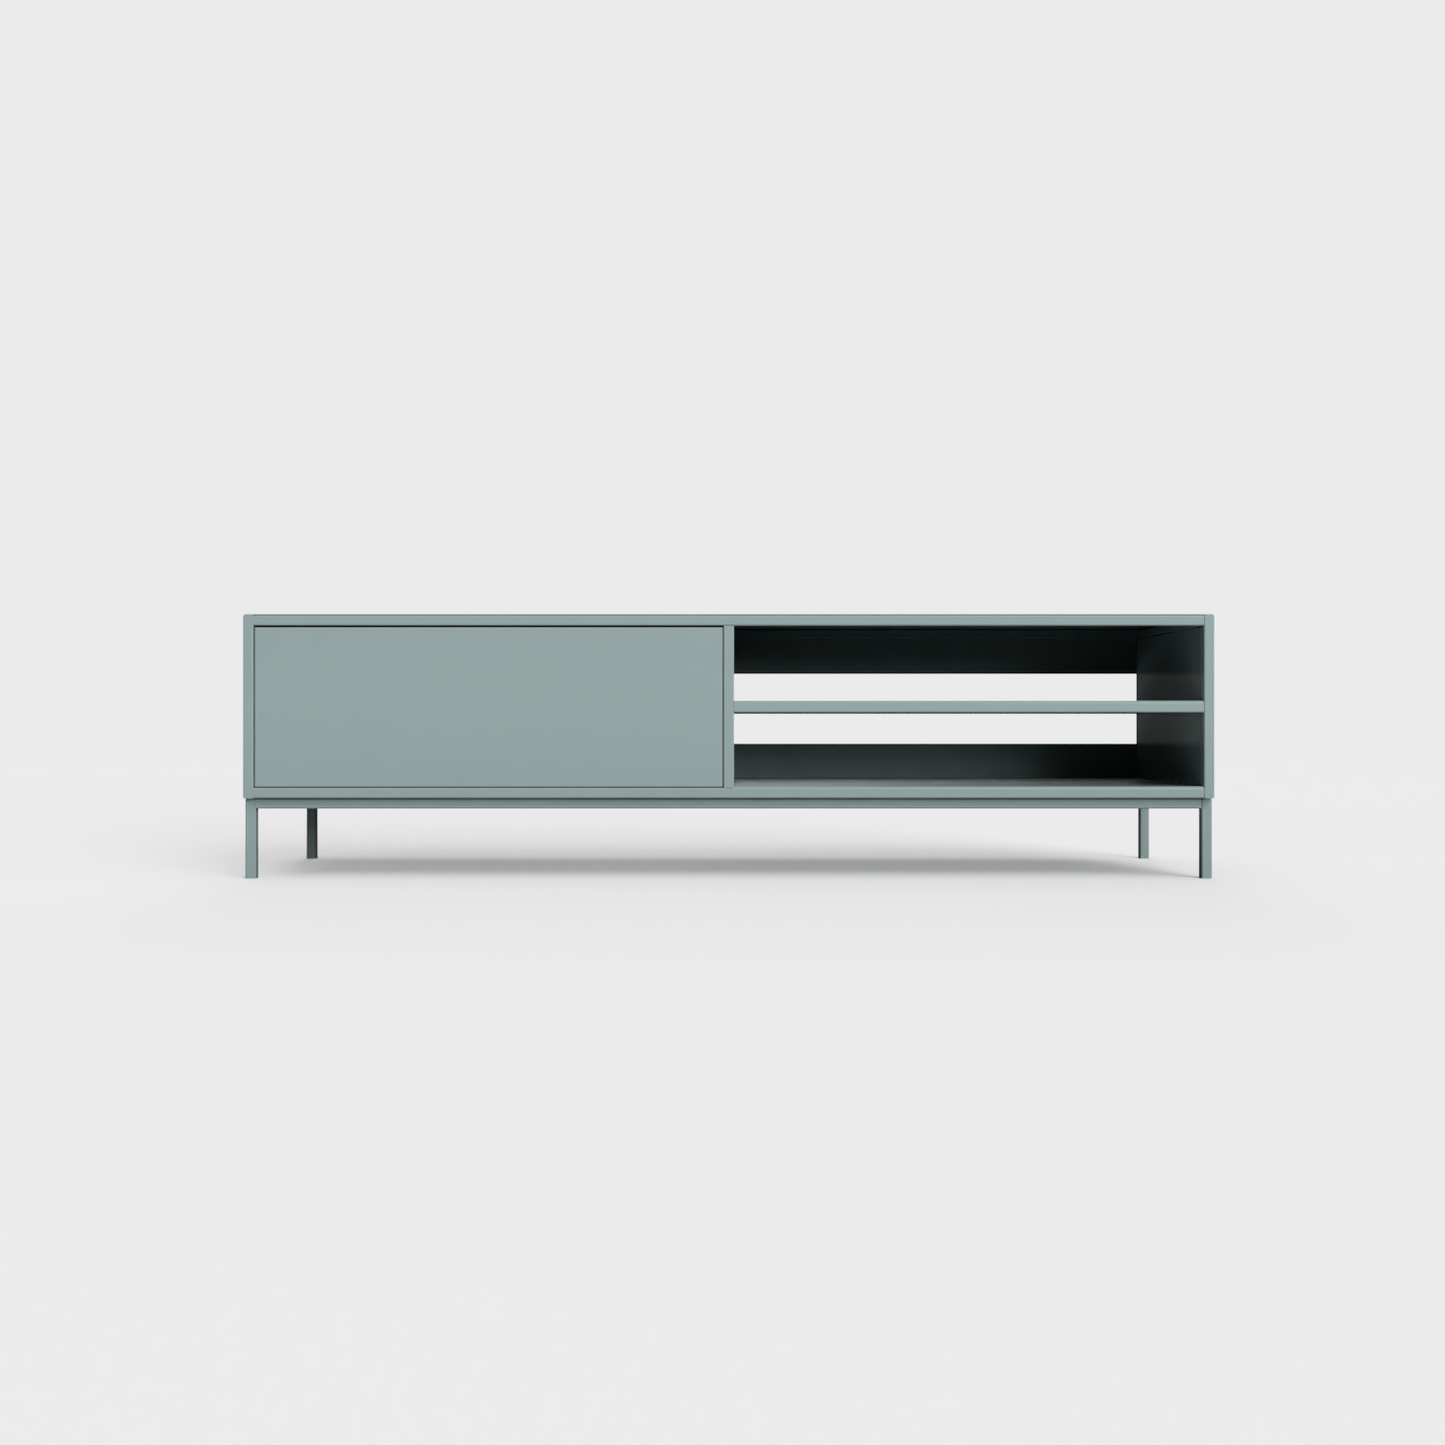 Prunus 02 Lowboard in Celadon Green color, powder-coated steel, elegant and modern piece of furniture for your living room